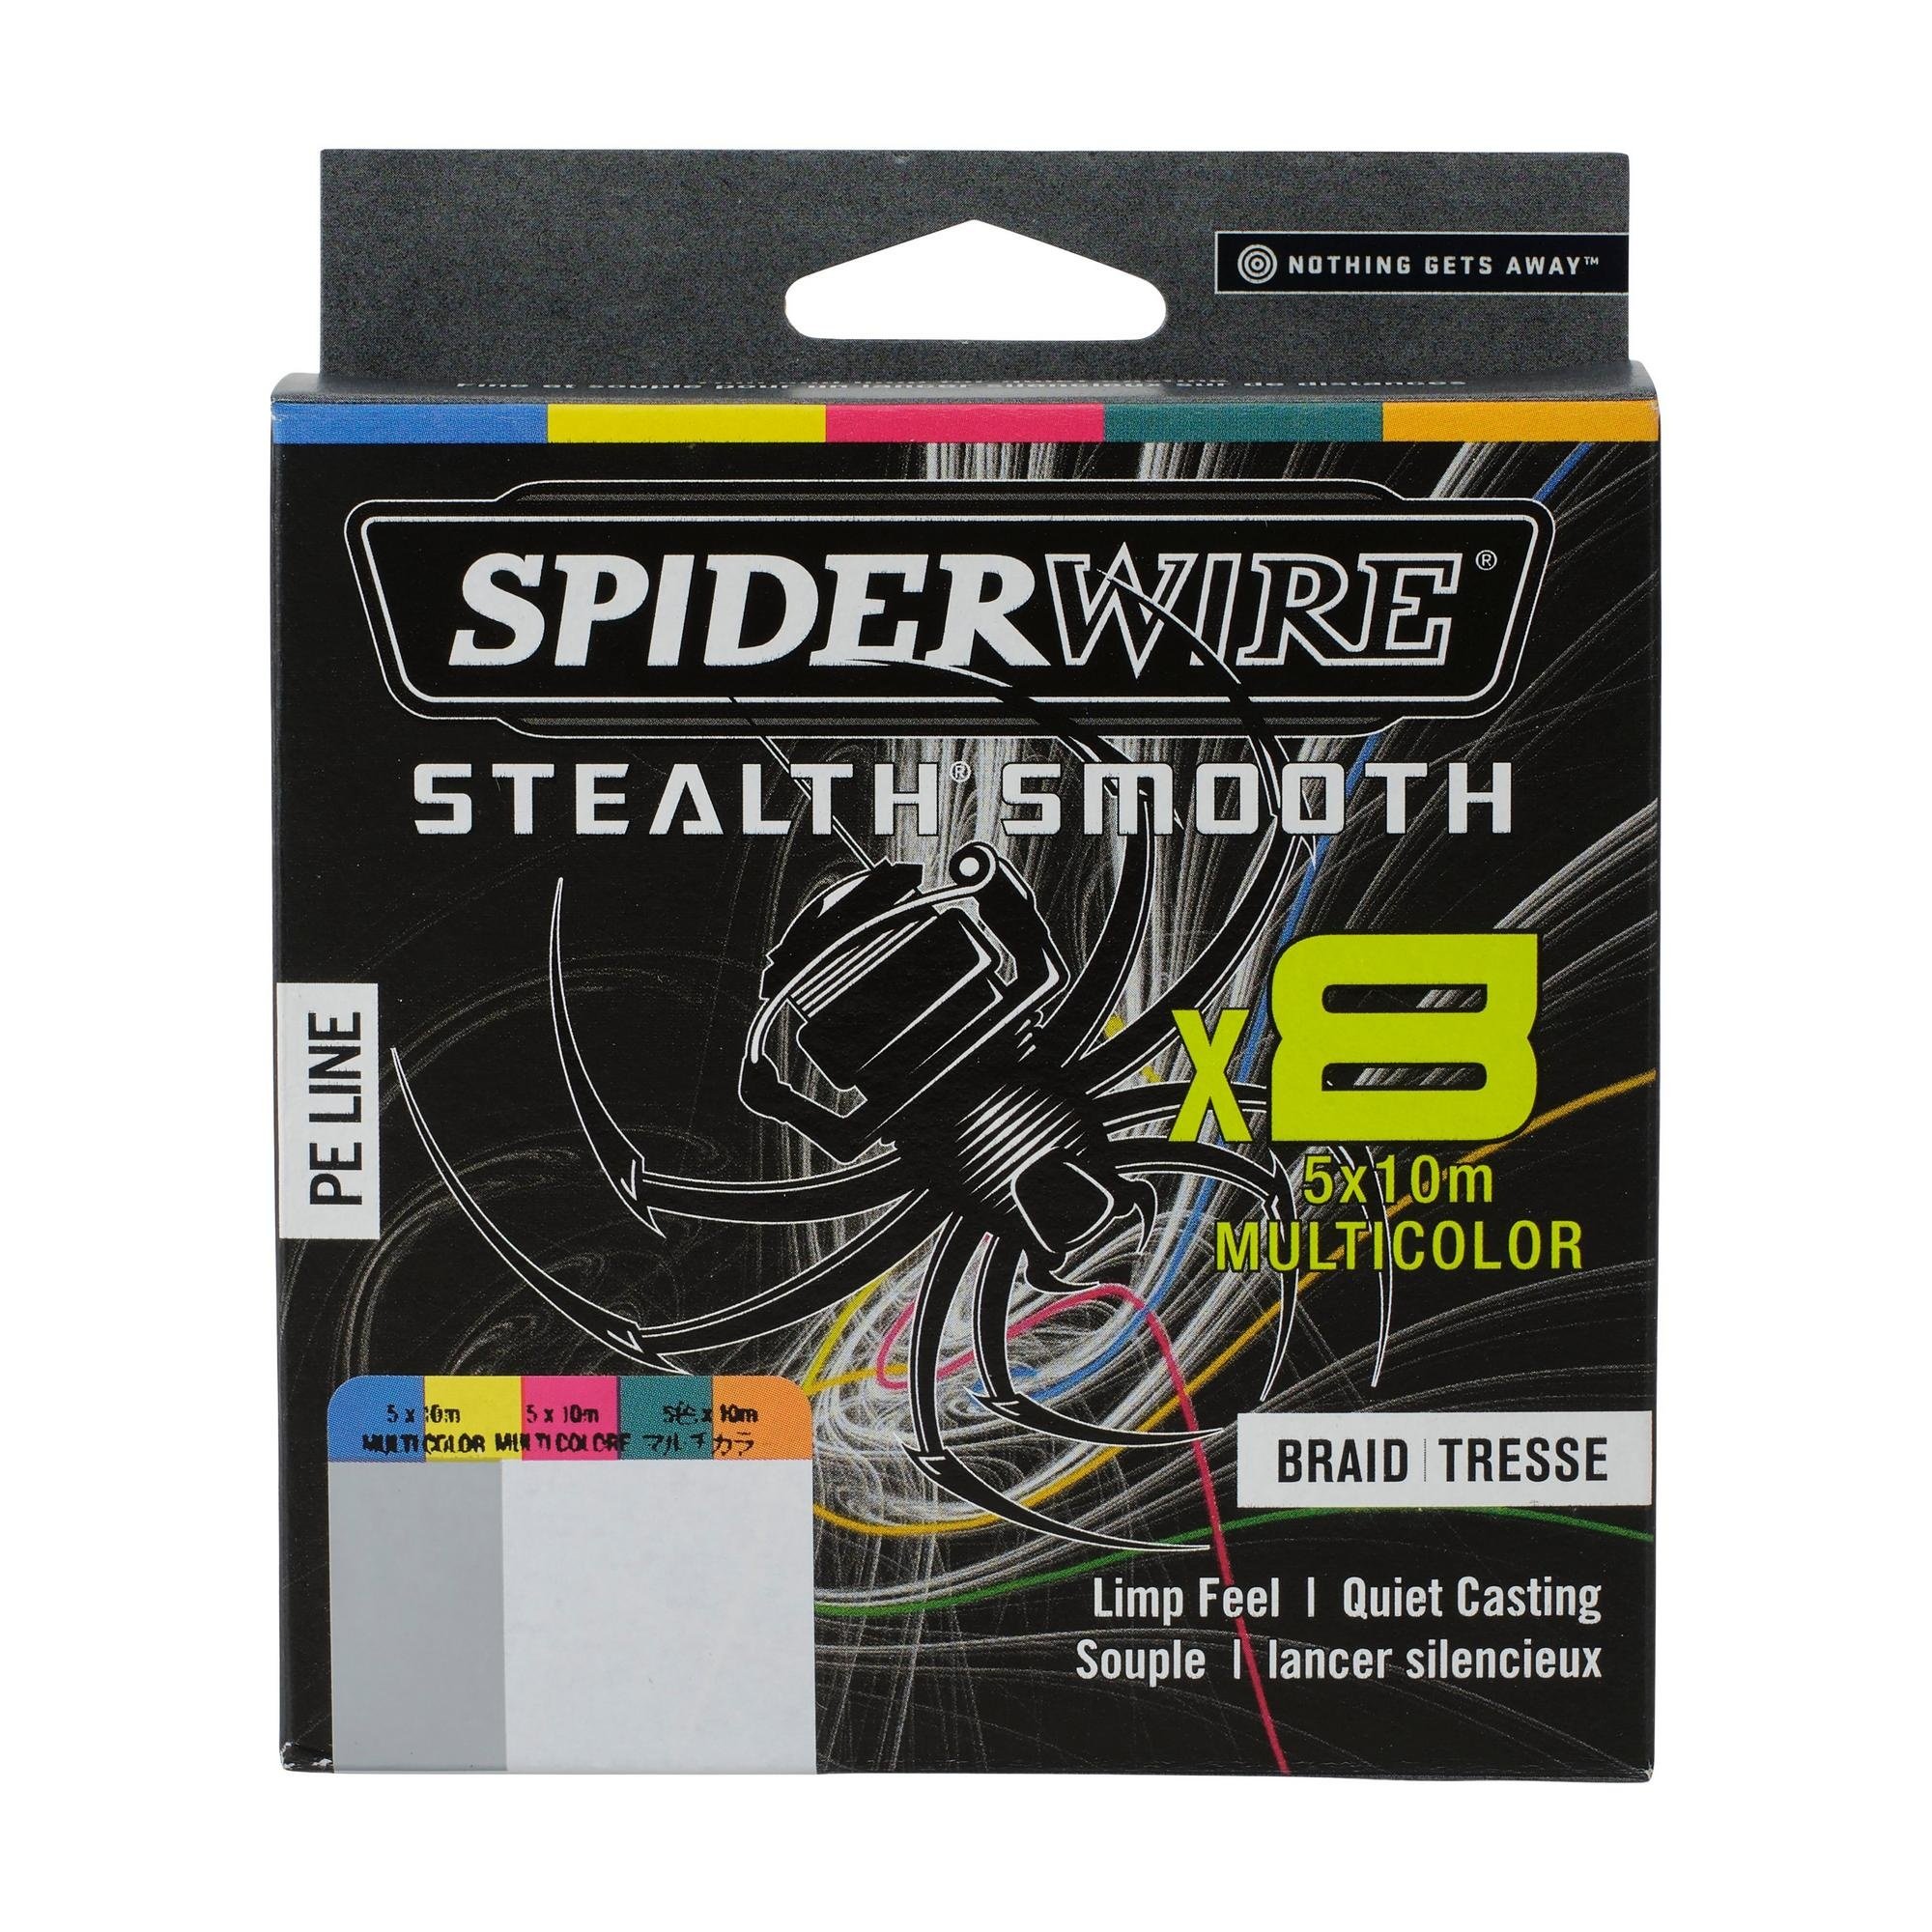 https://cdn.webshopapp.com/shops/305322/files/448039675/spiderwire-stealth-smooth8-5x10m-multi-color.jpg